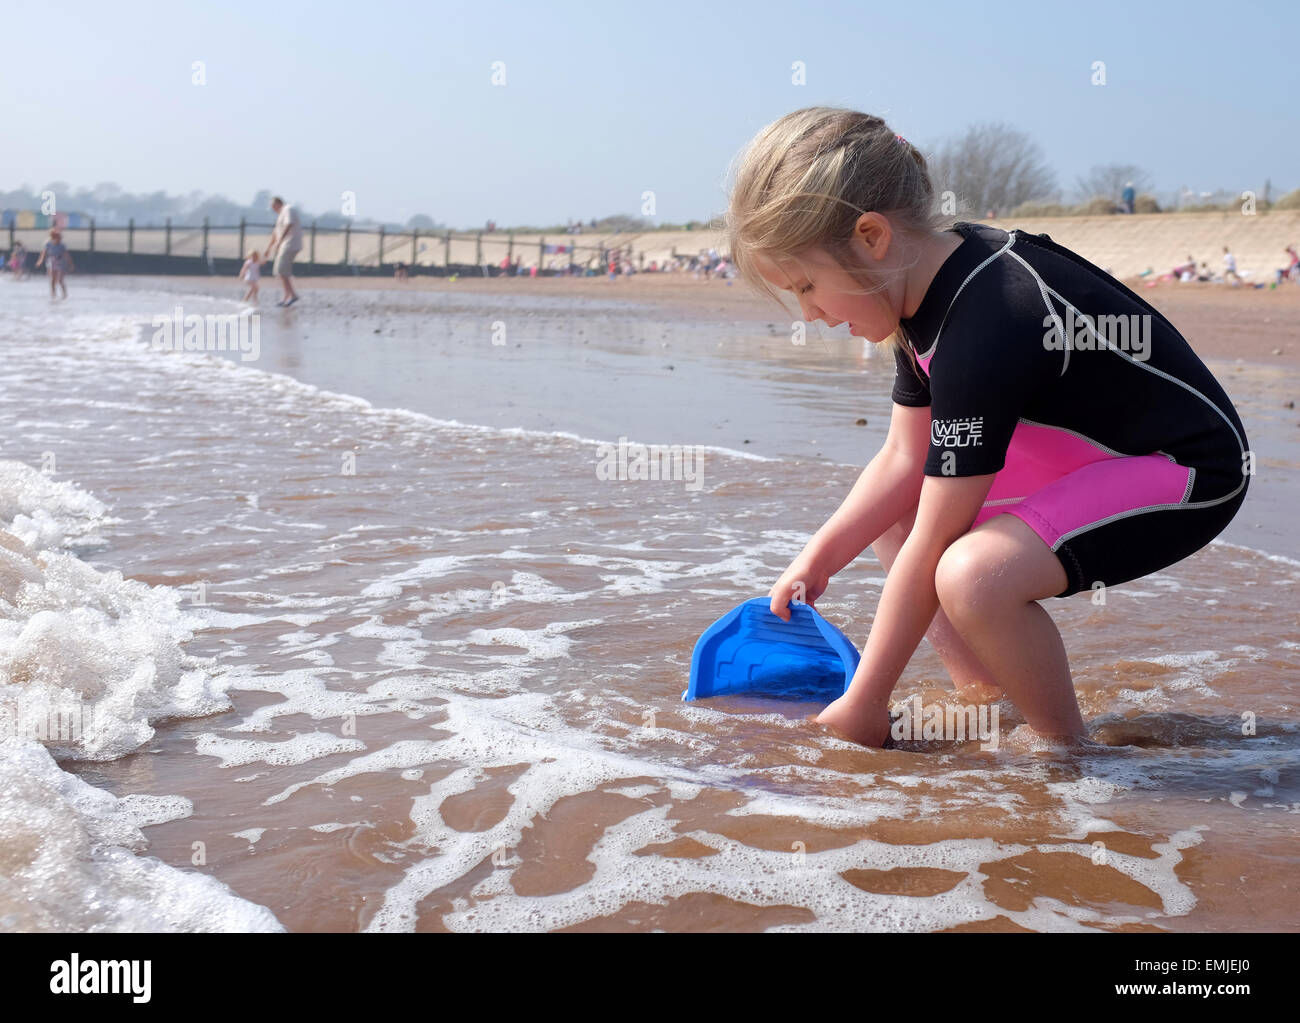 A young girl in a wetsuit collecting water with a bucket on the beach UK Stock Photo